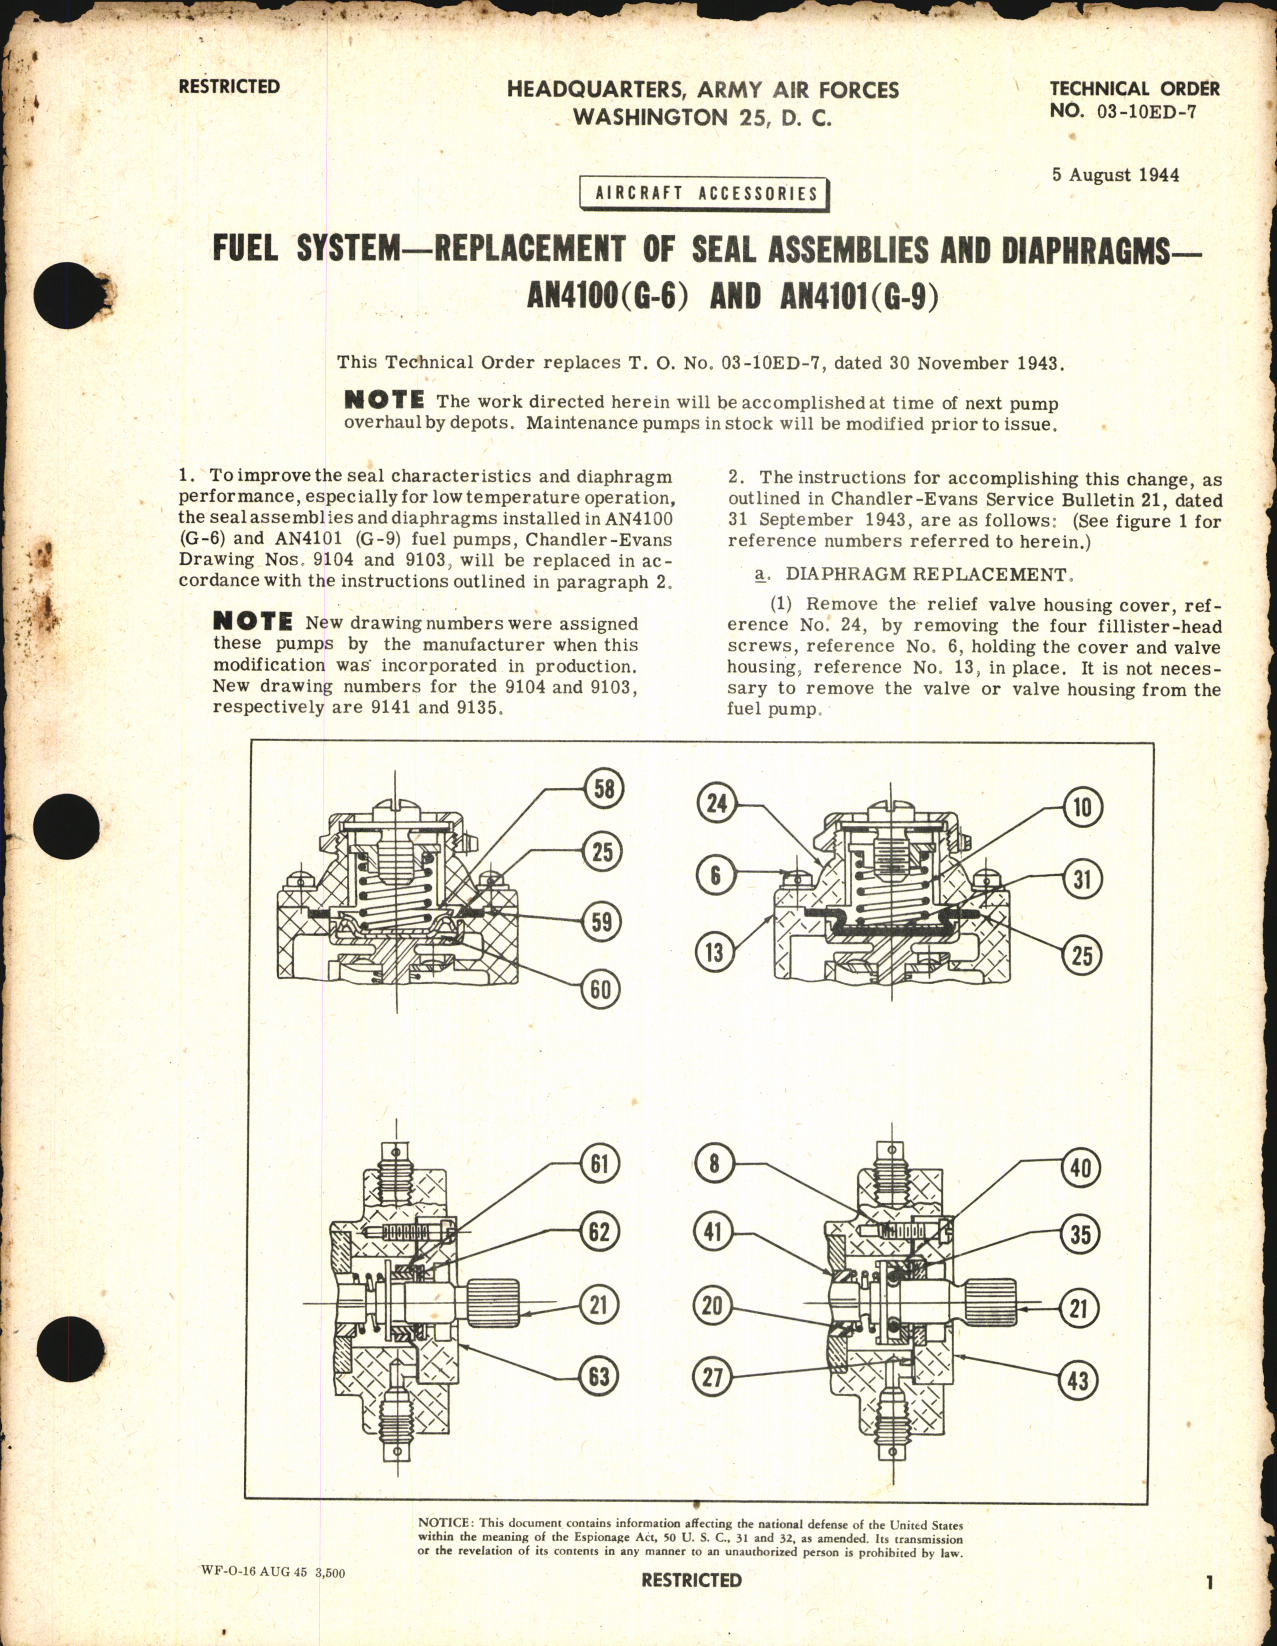 Sample page 1 from AirCorps Library document: Replacement of Seal Assemblies and Diaphragms for AN4100 (G-6) and AN4101 (G-9)